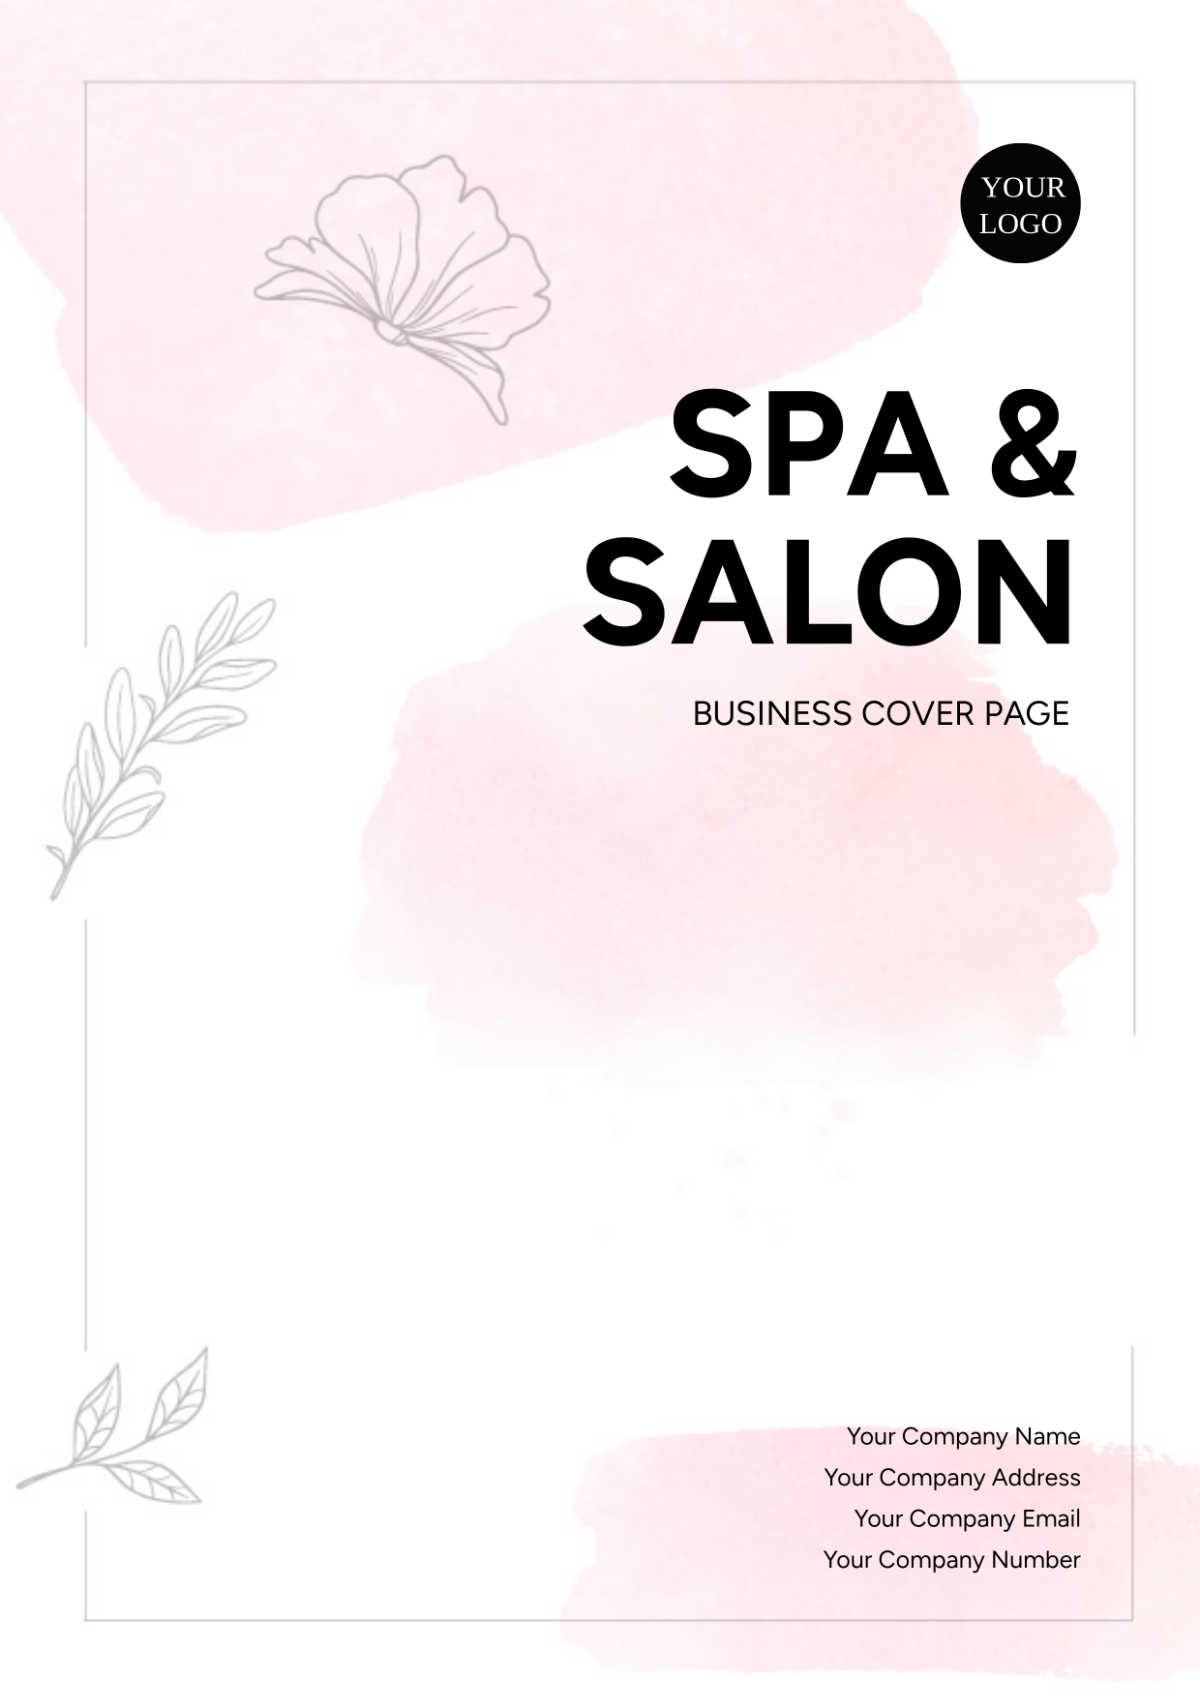 Salon & Spa Business Cover Page